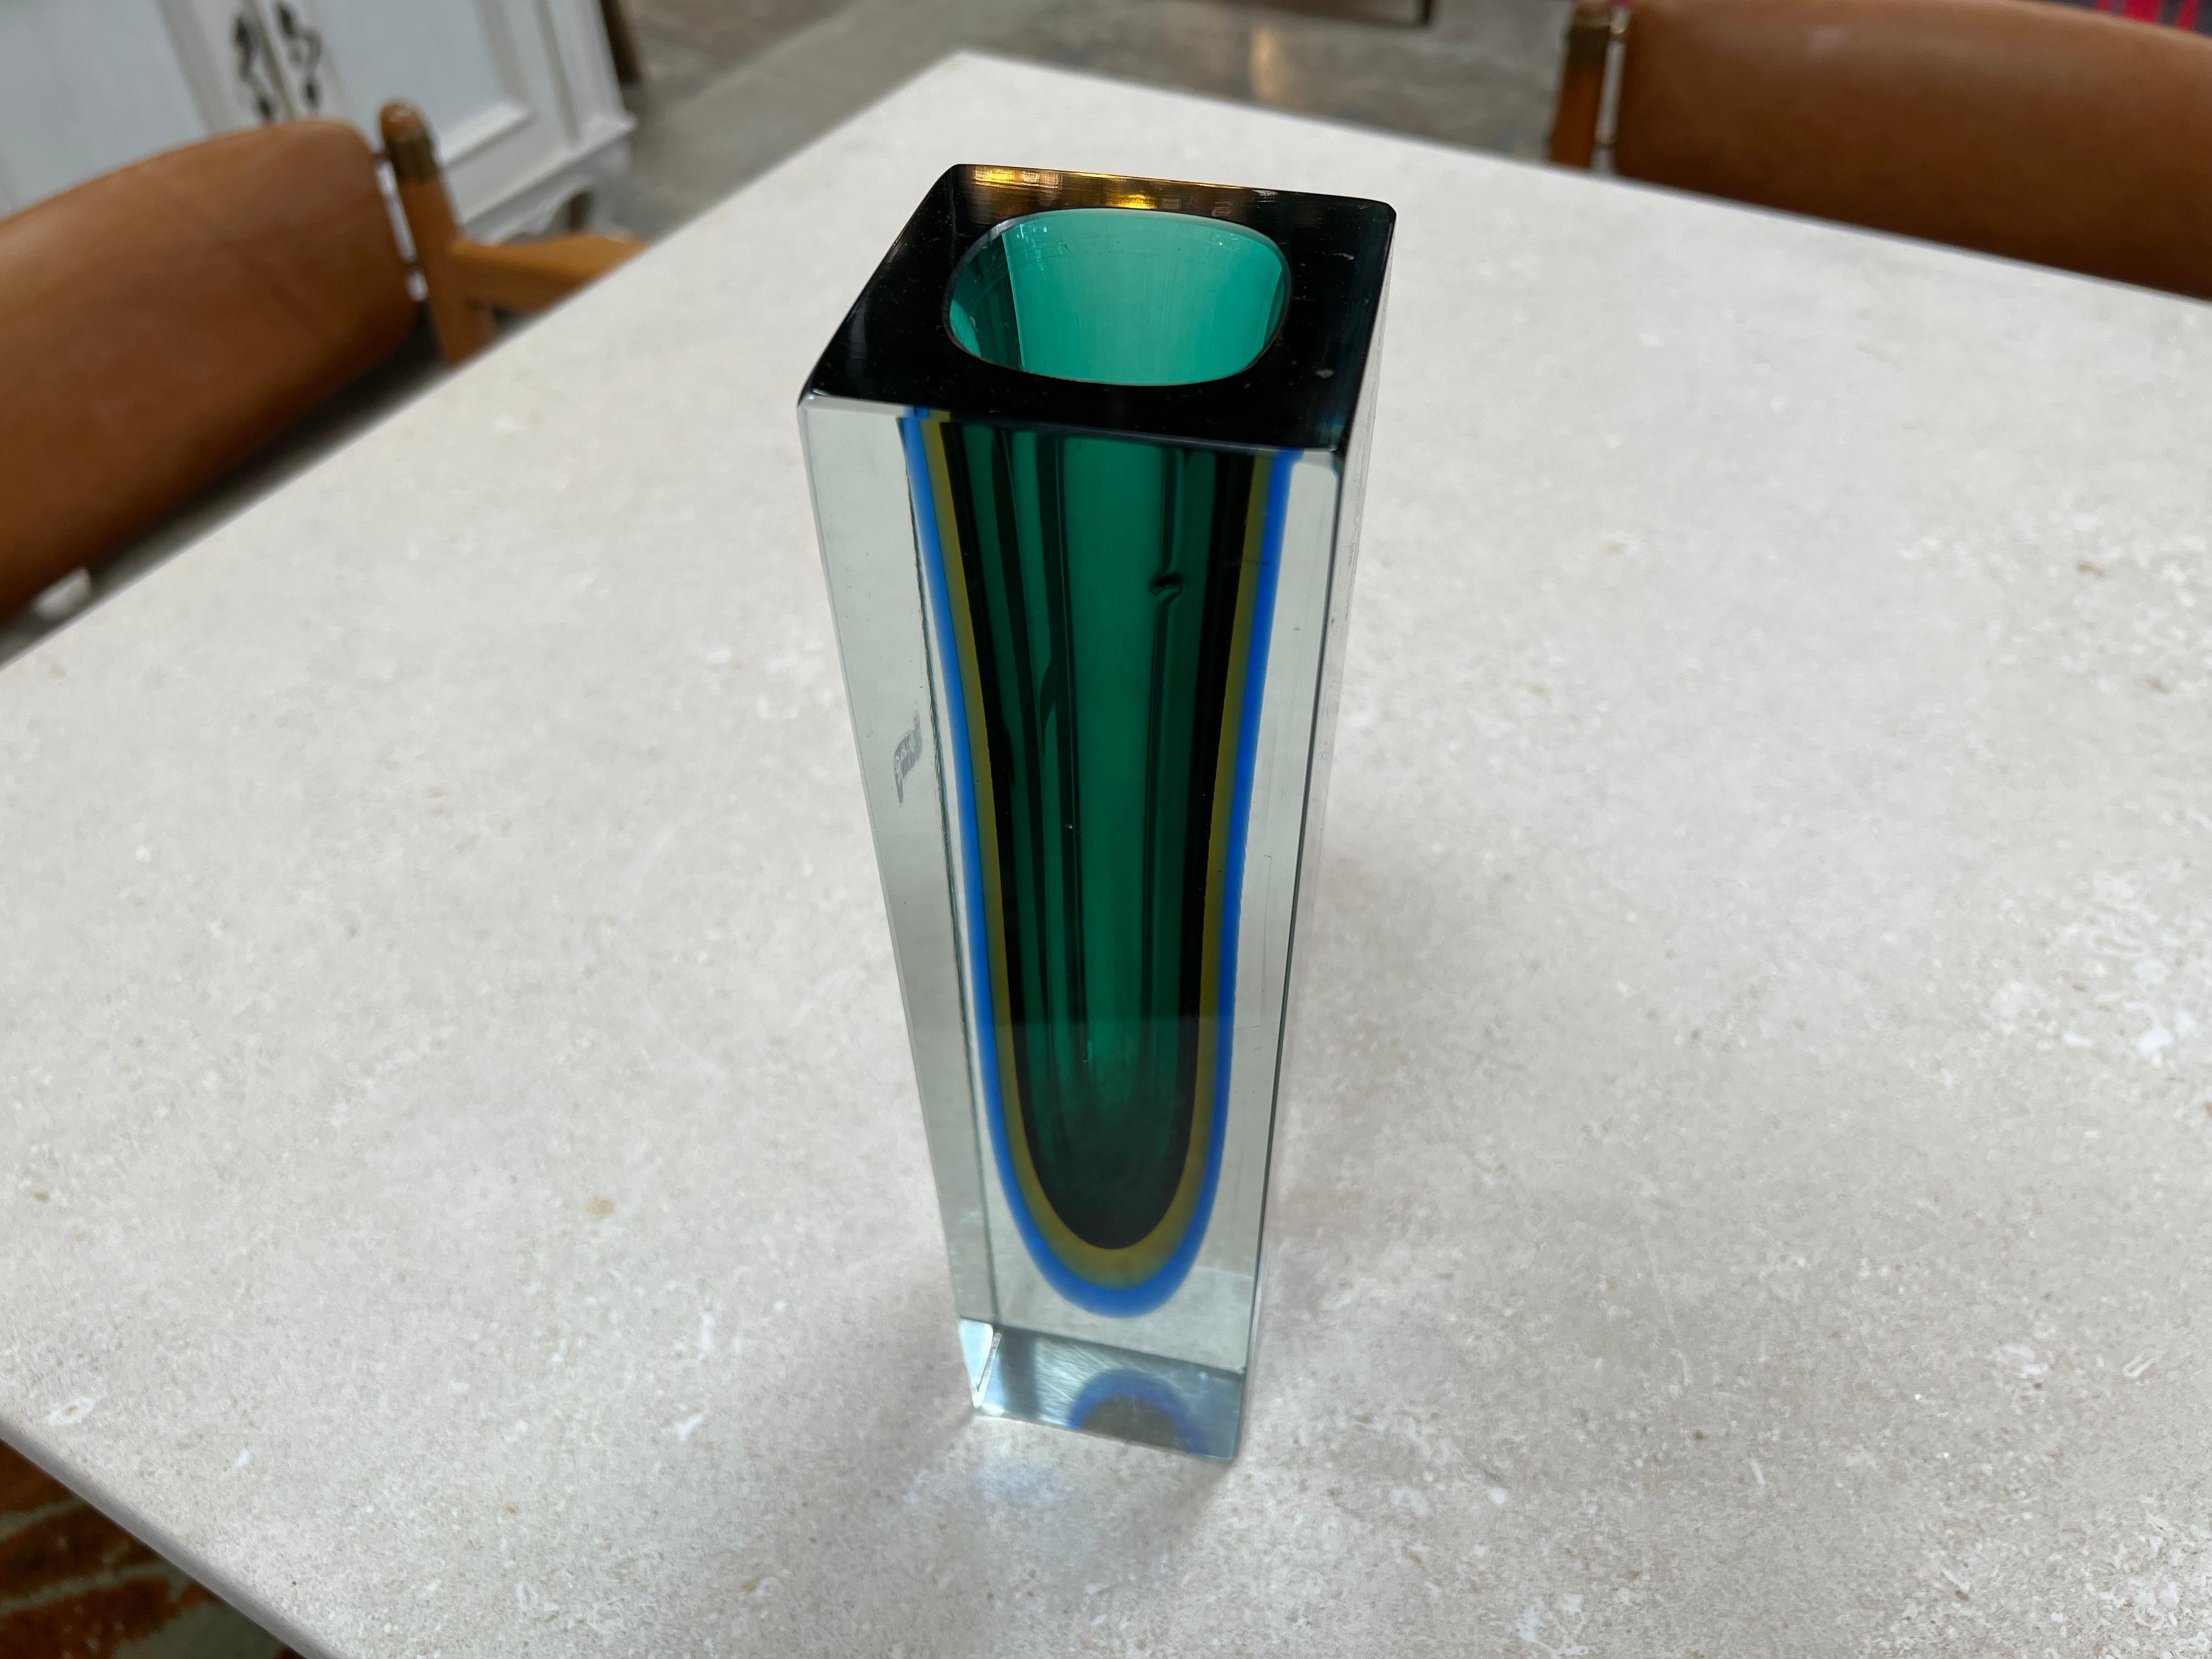 The Alessandro Mandruzzato Vintage Murano Vase from the 1970s is a highly sought-after piece of art glass. Crafted in a stunning shade of purple, this vase is characterized by its exceptional craftsmanship and distinctive design. The rarity of this